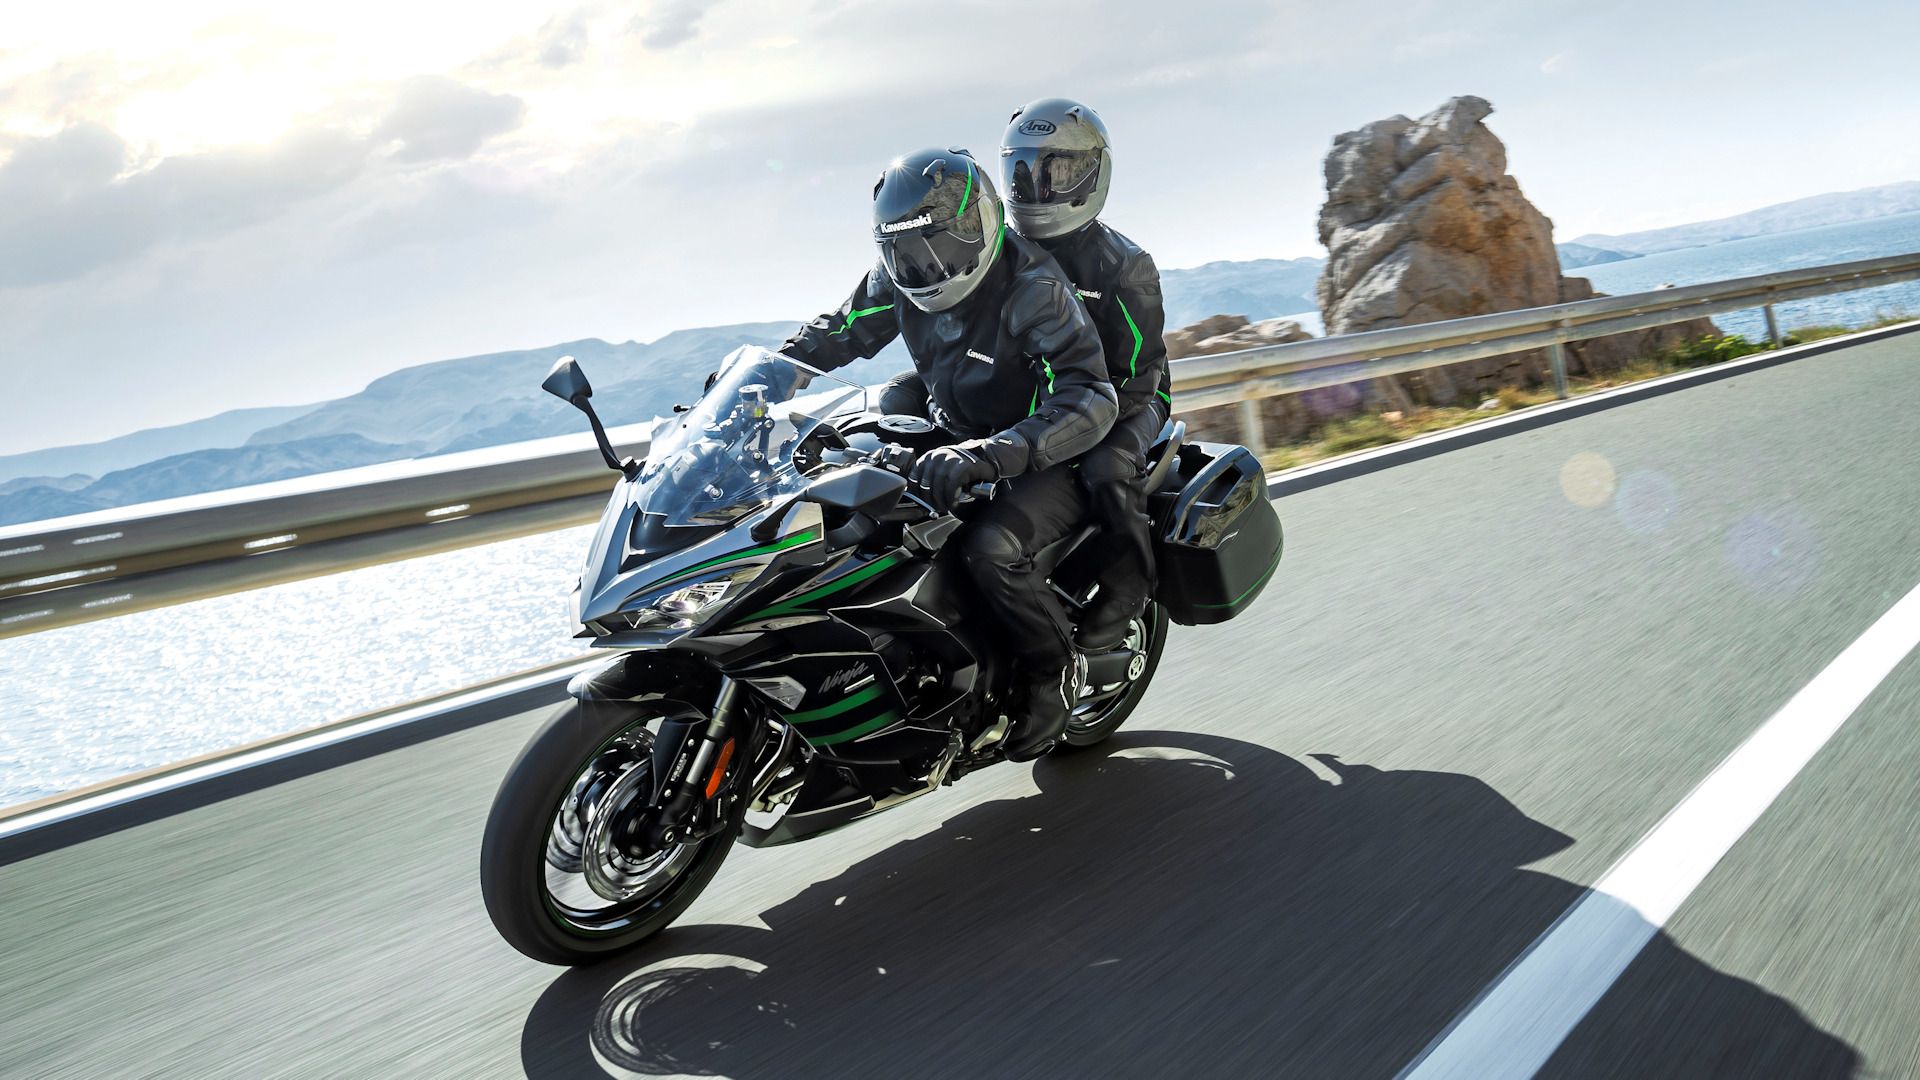 Two-up riding on a gray 2020 Kawasaki Ninja 1000SX shown with accessory Touring package